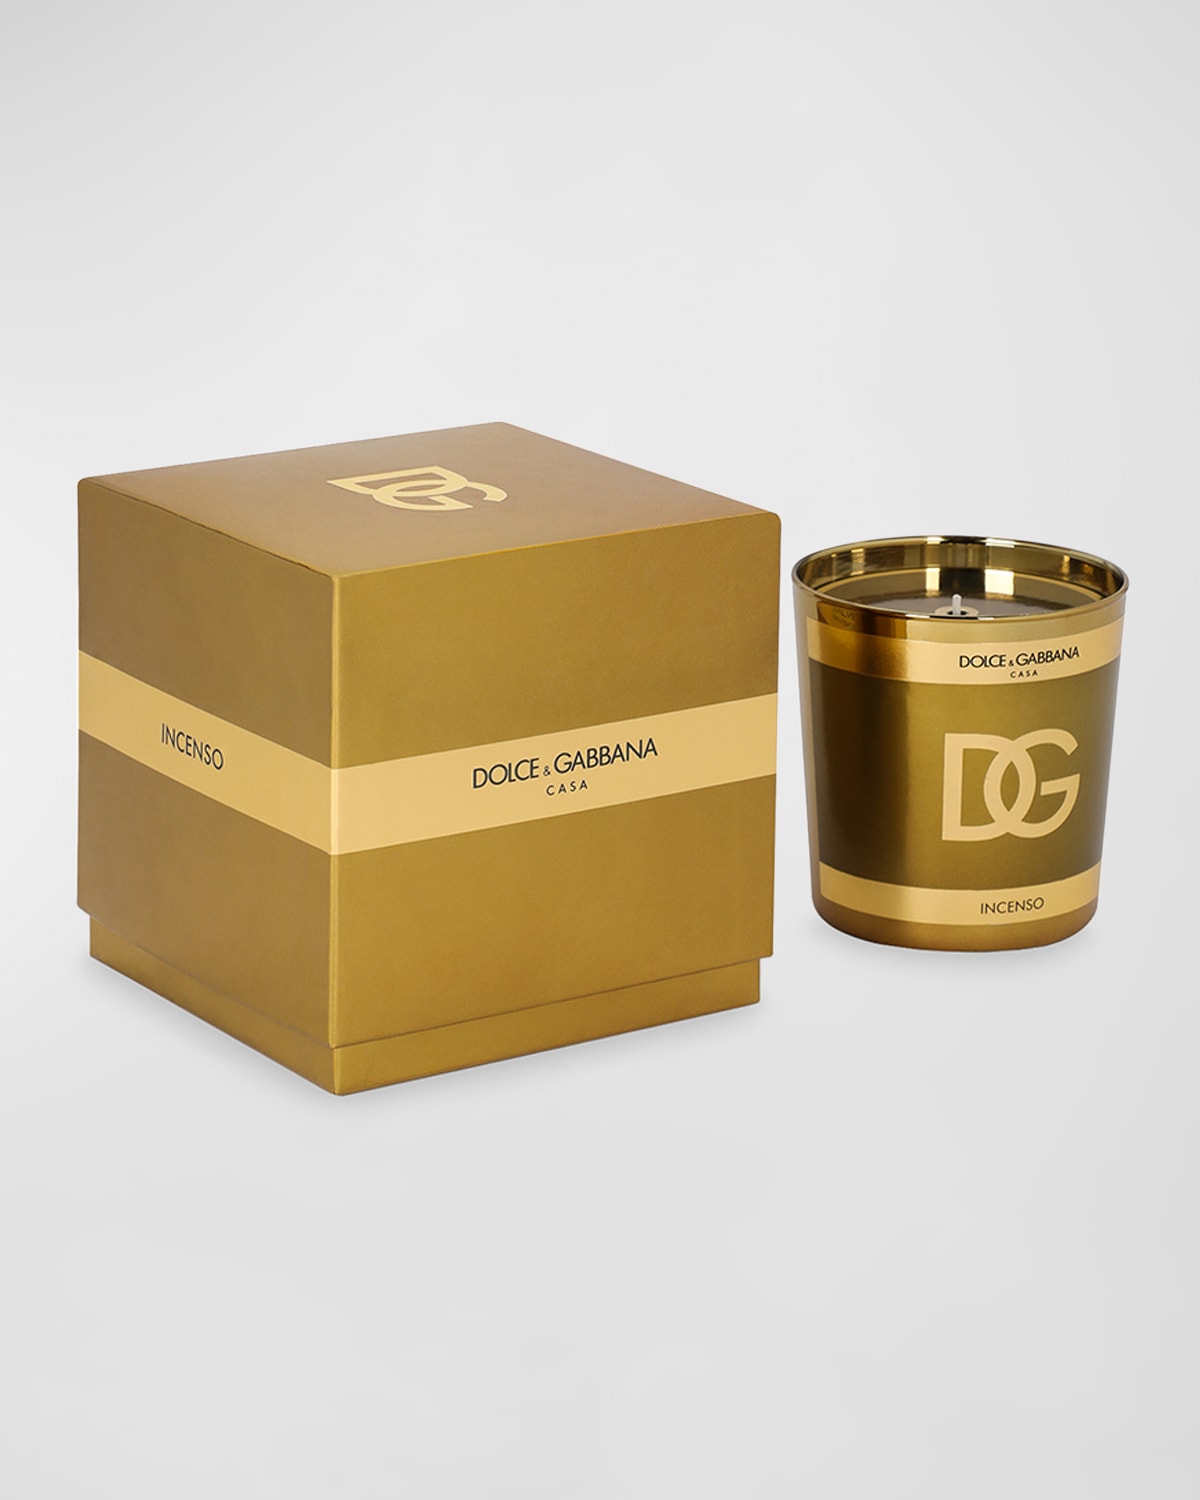 Dolce&Gabbana Casa Leopard Scented Candle, 8.8 oz. | Horchow